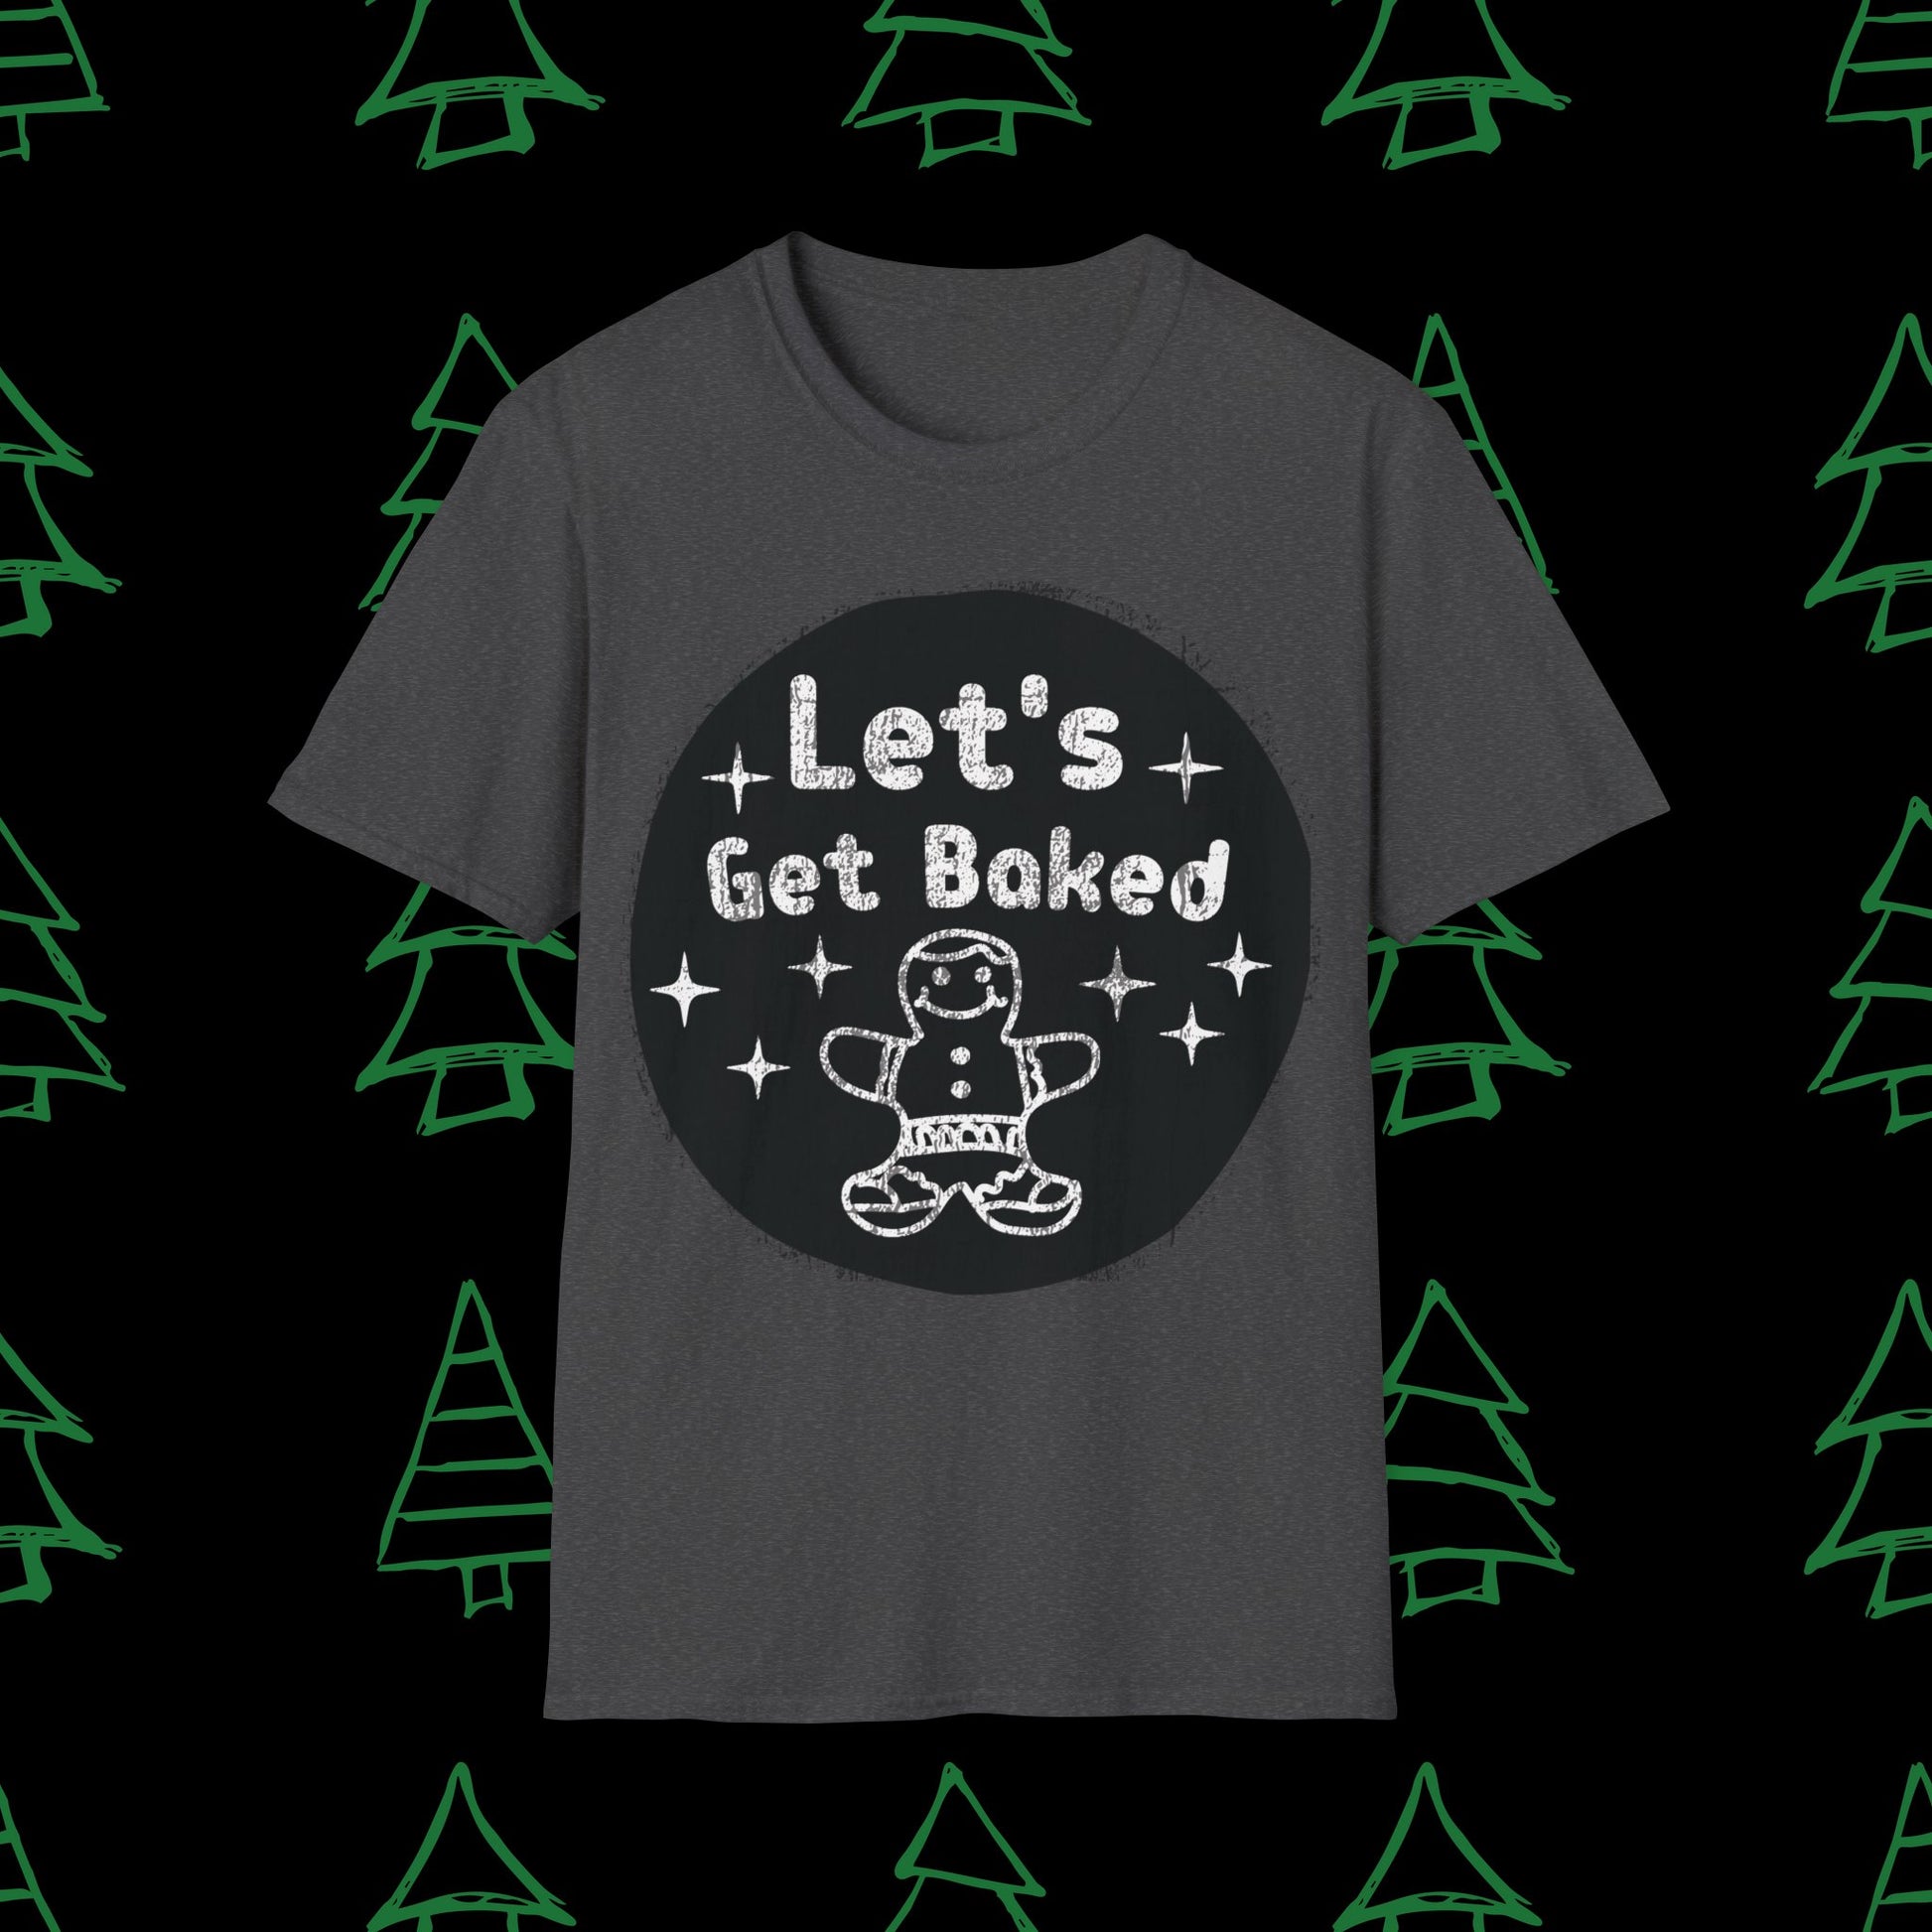 Christmas T-Shirt - Let's Get Baked - Mens Christmas Shirts - Adult Christmas TShirts T-Shirts Graphic Avenue Dark Heather Adult Small 